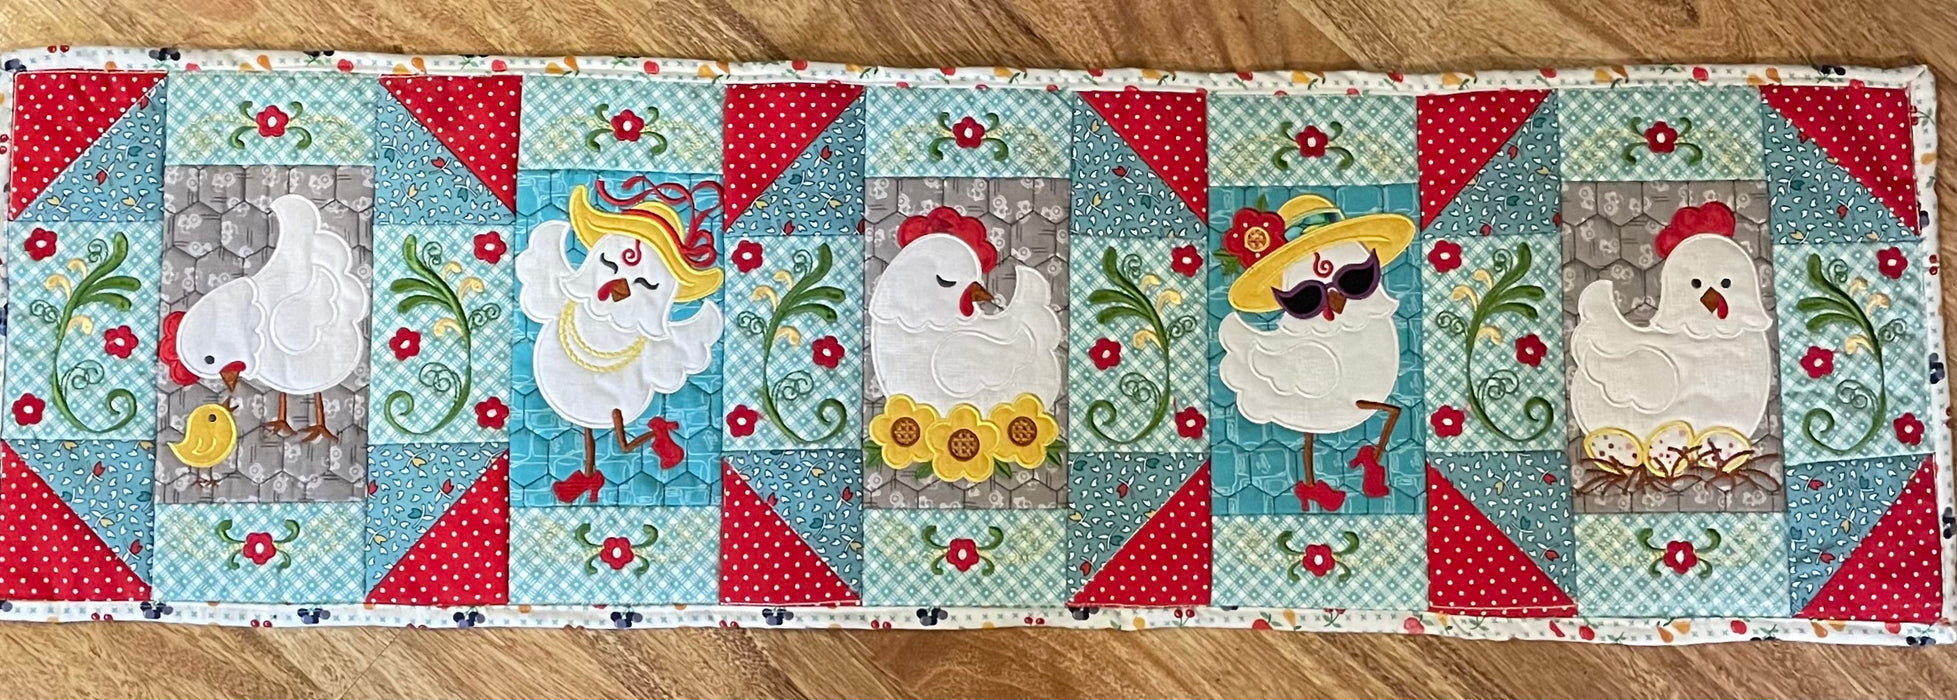 Chicken Table Runner Kit - Machine Embroidery